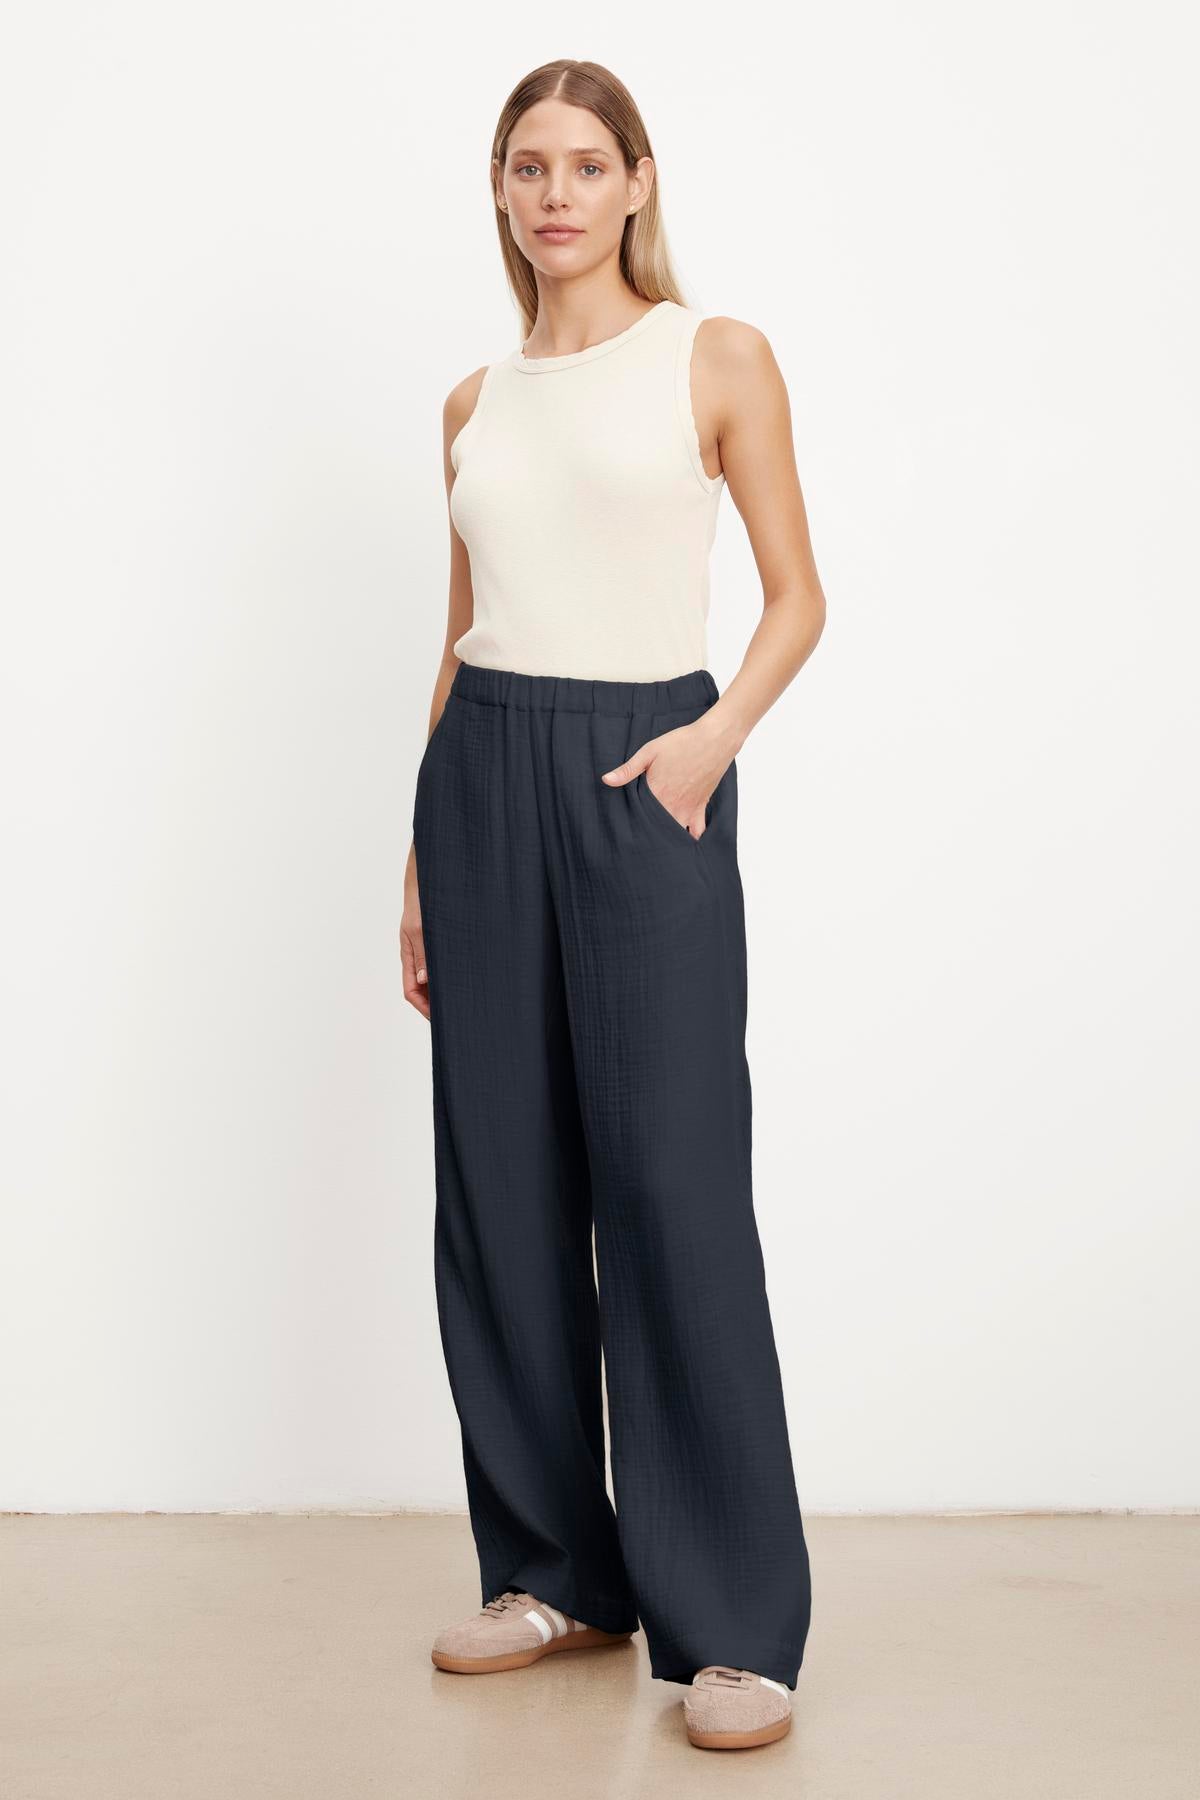 Woman in a sleeveless top and Velvet by Graham & Spencer JERRY COTTON GAUZE PANT posing against a plain background.-36462884946113